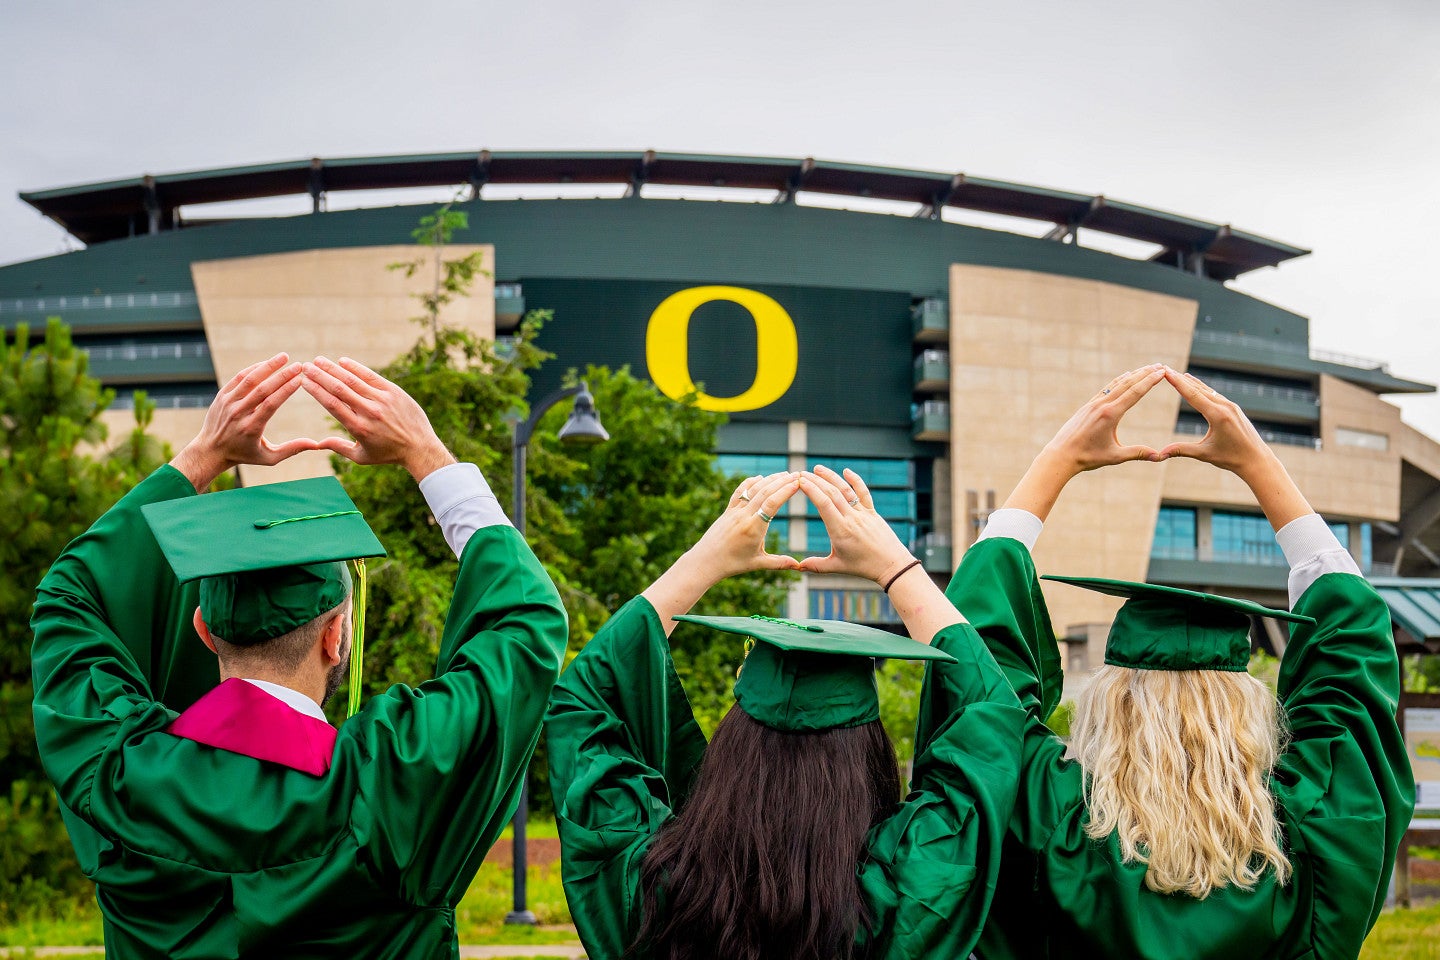 Three students wearing green graduation caps and gowns throw the O in front of Autzen Stadium